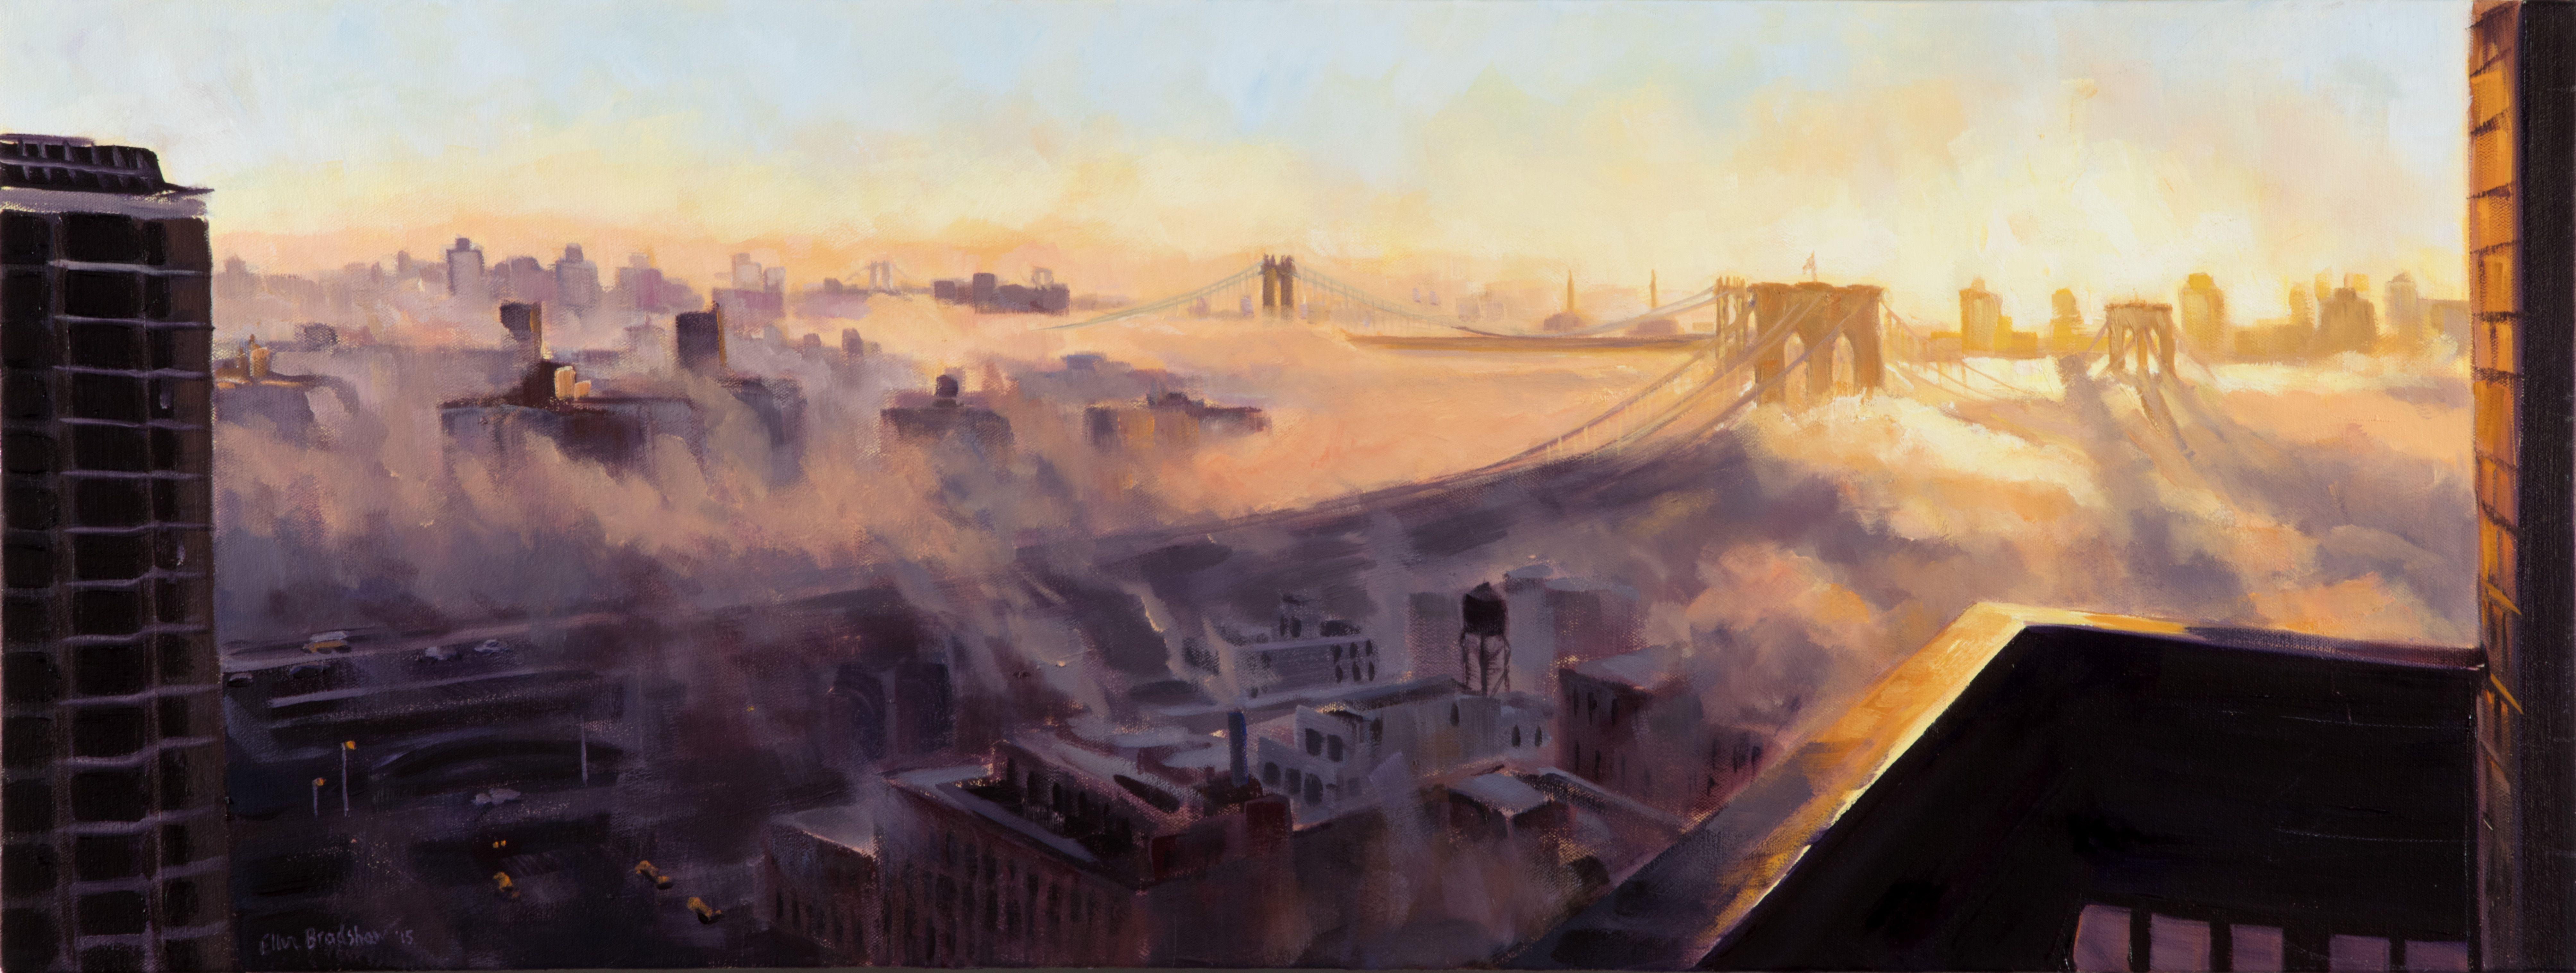 A sweeping view from my 25th floor balcony on a foggy morning at sunrise overlooking Lower Manhattan, with the Brooklyn Bridge, Manhattan Bridge and Williamsburg Bridge shrouded in fog. :: Painting :: Realism :: This piece comes with an official